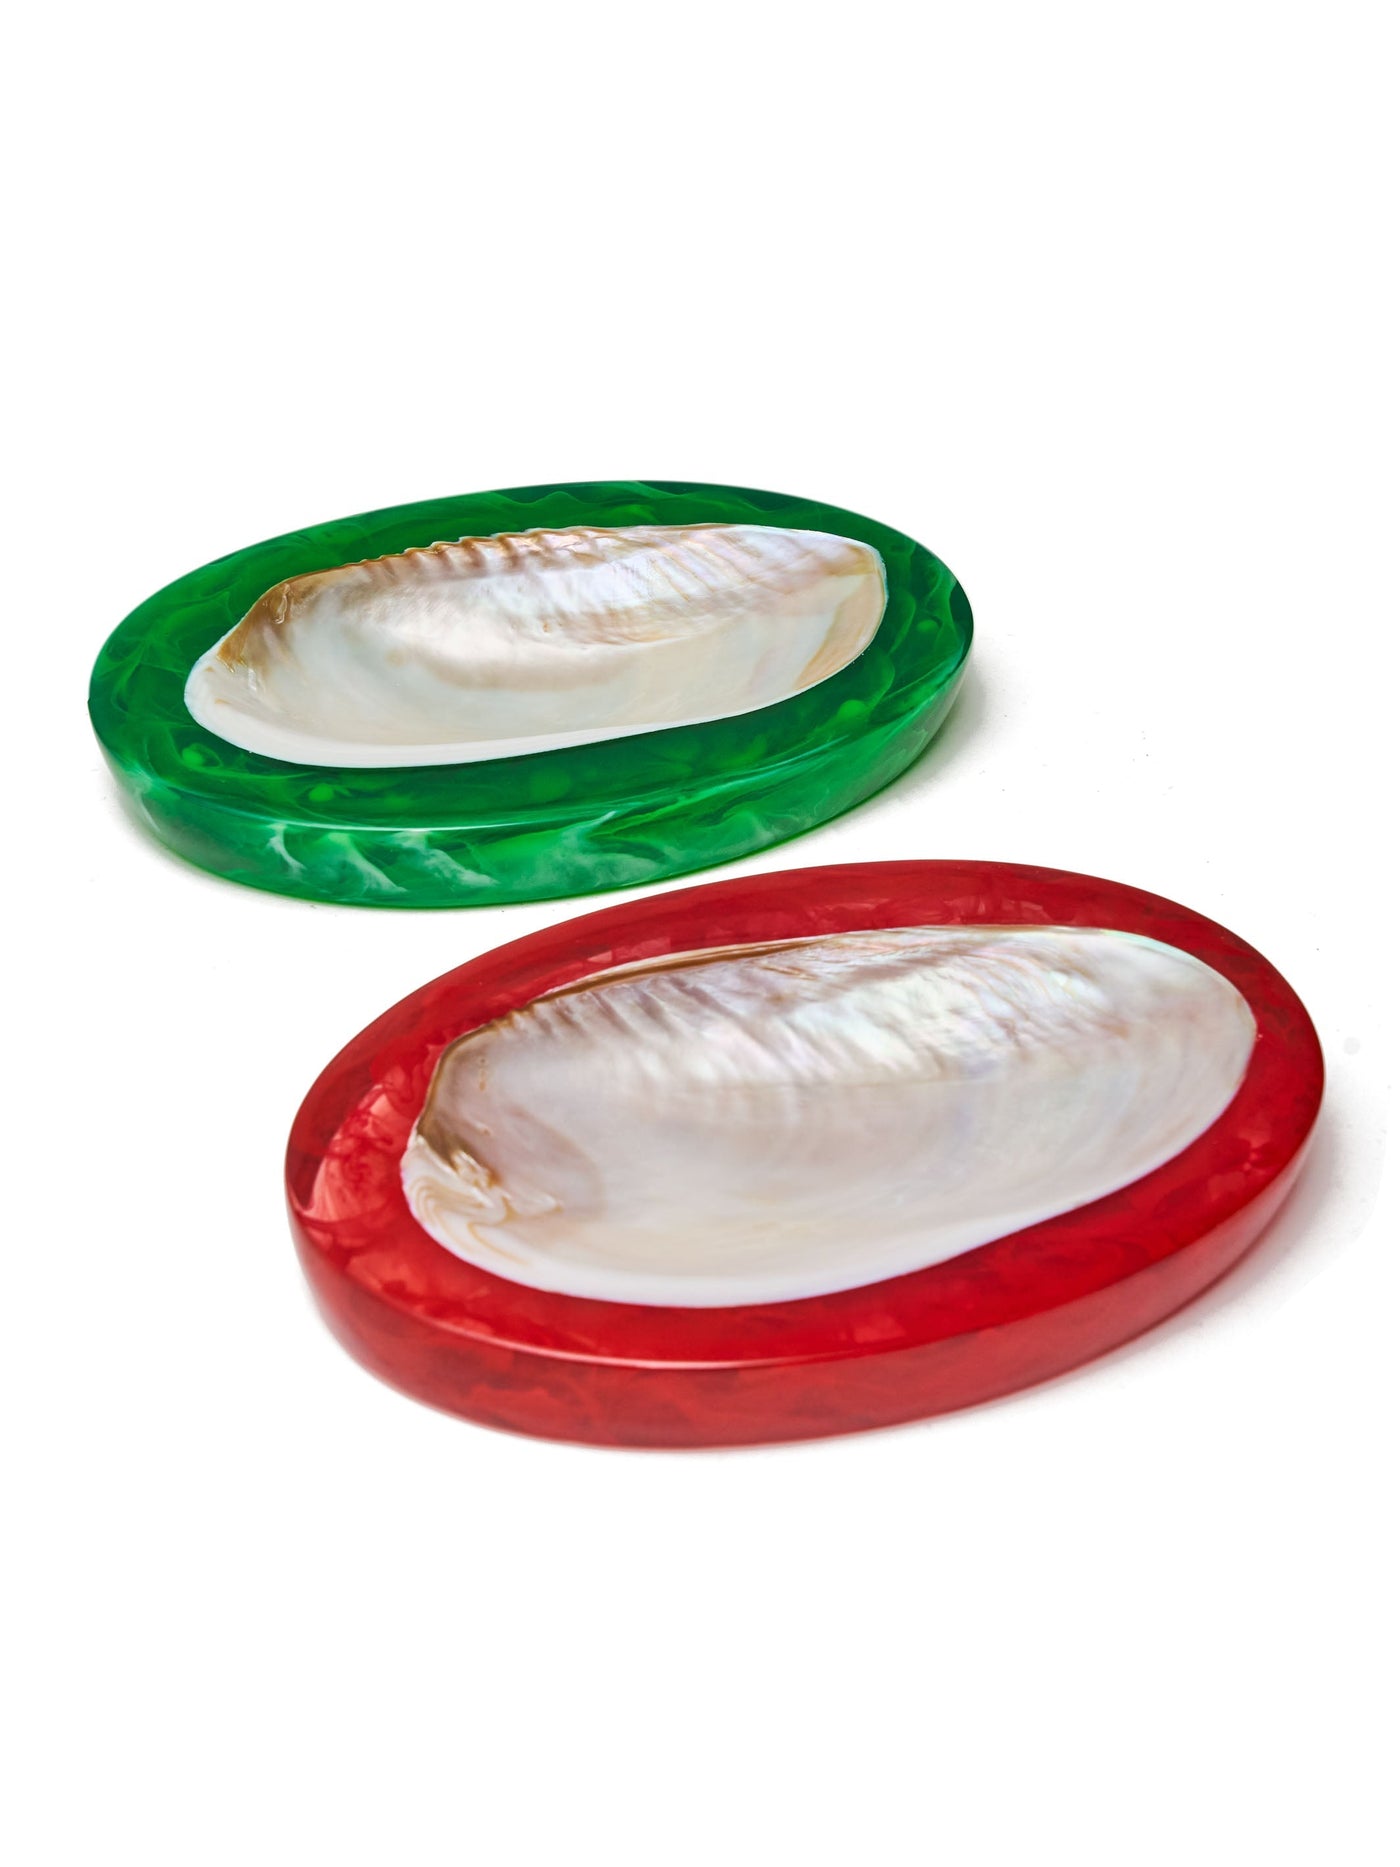 Large Caviar Dishes in Green and Red by Lily Juliet